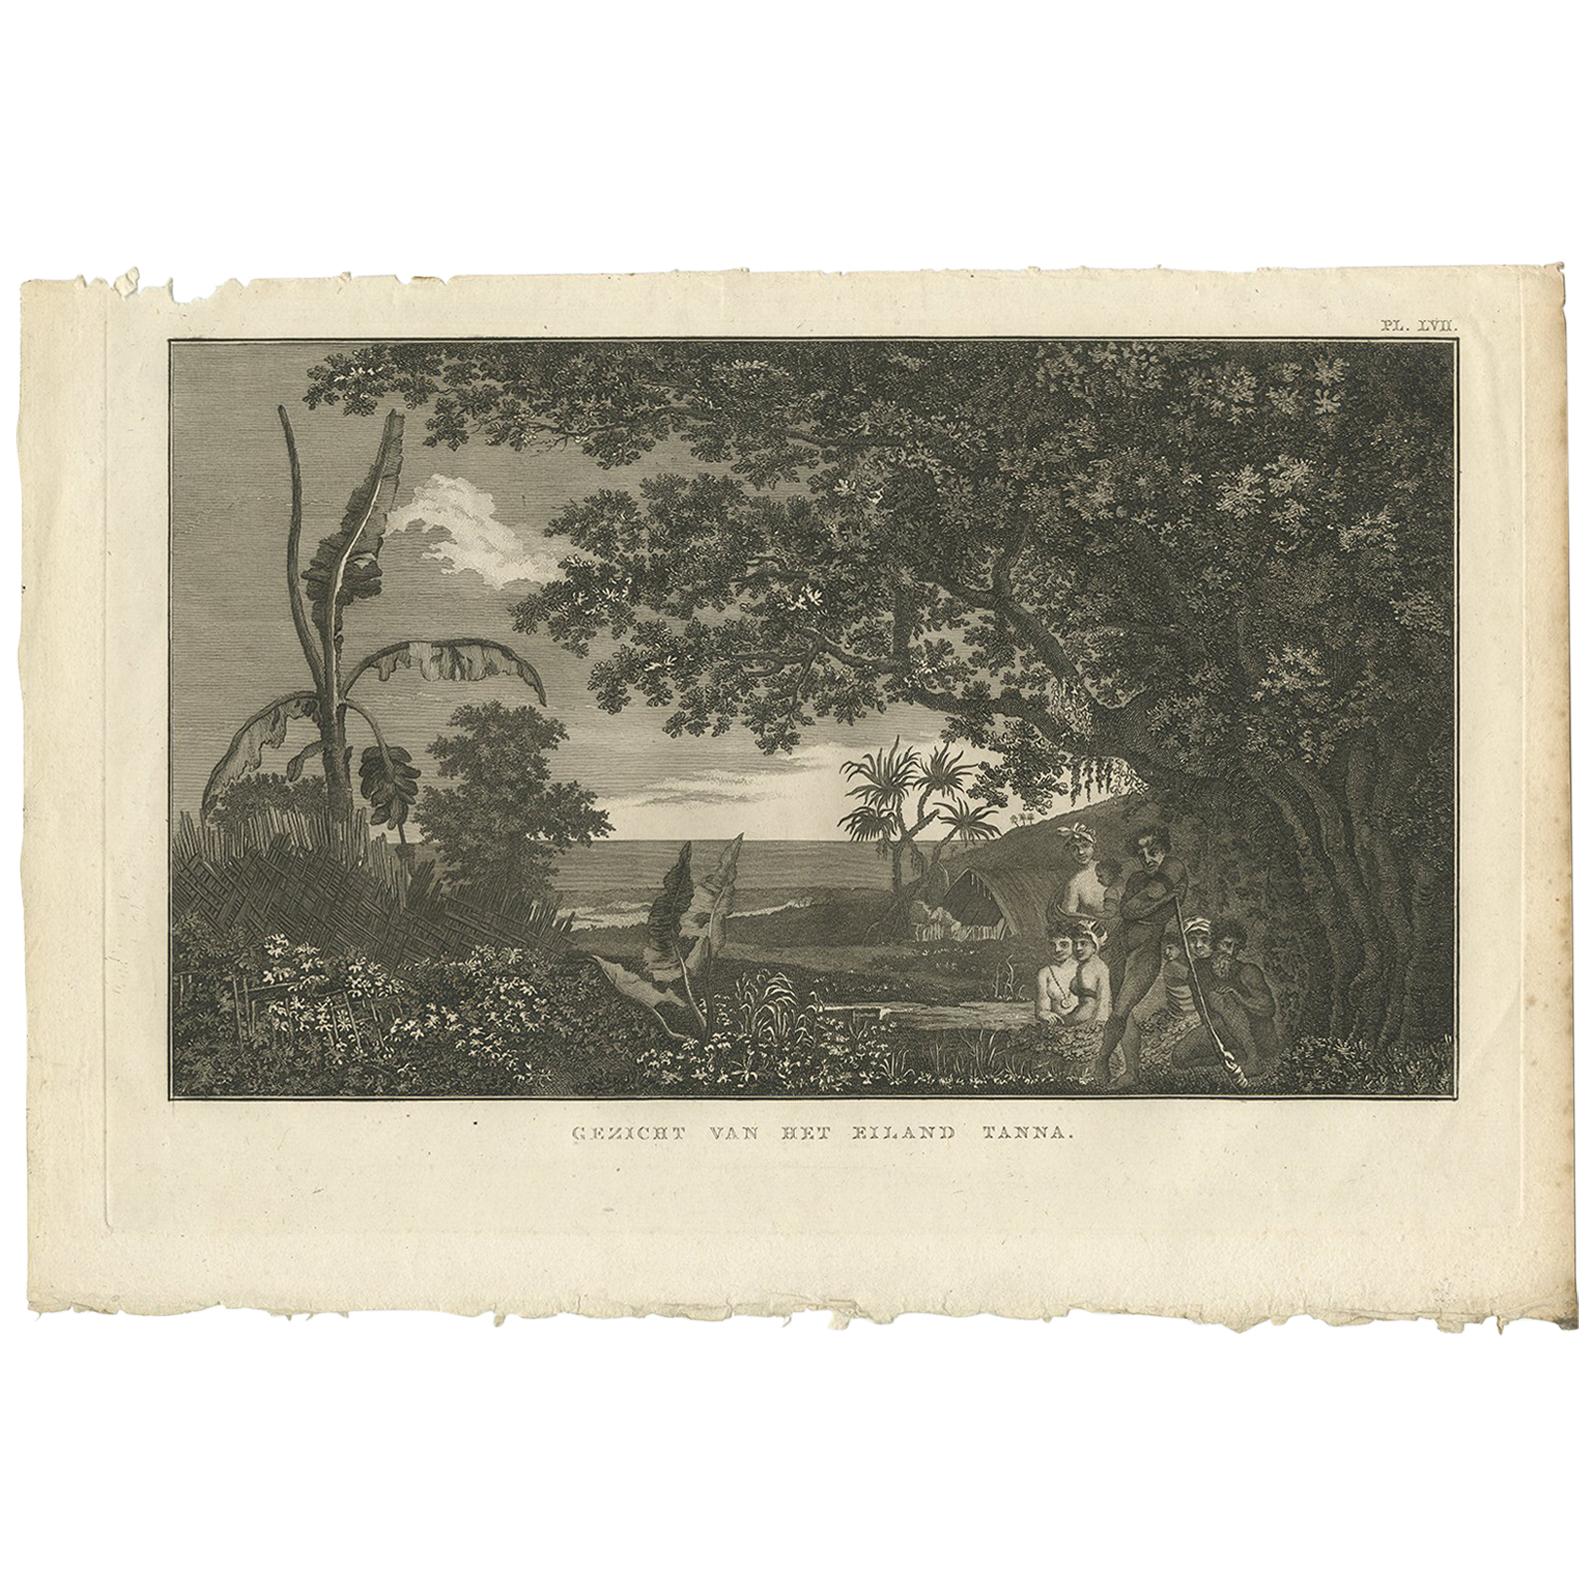 View of Tanna Island: A Glimpse into Vanuatu from Cook's Voyages, 1803